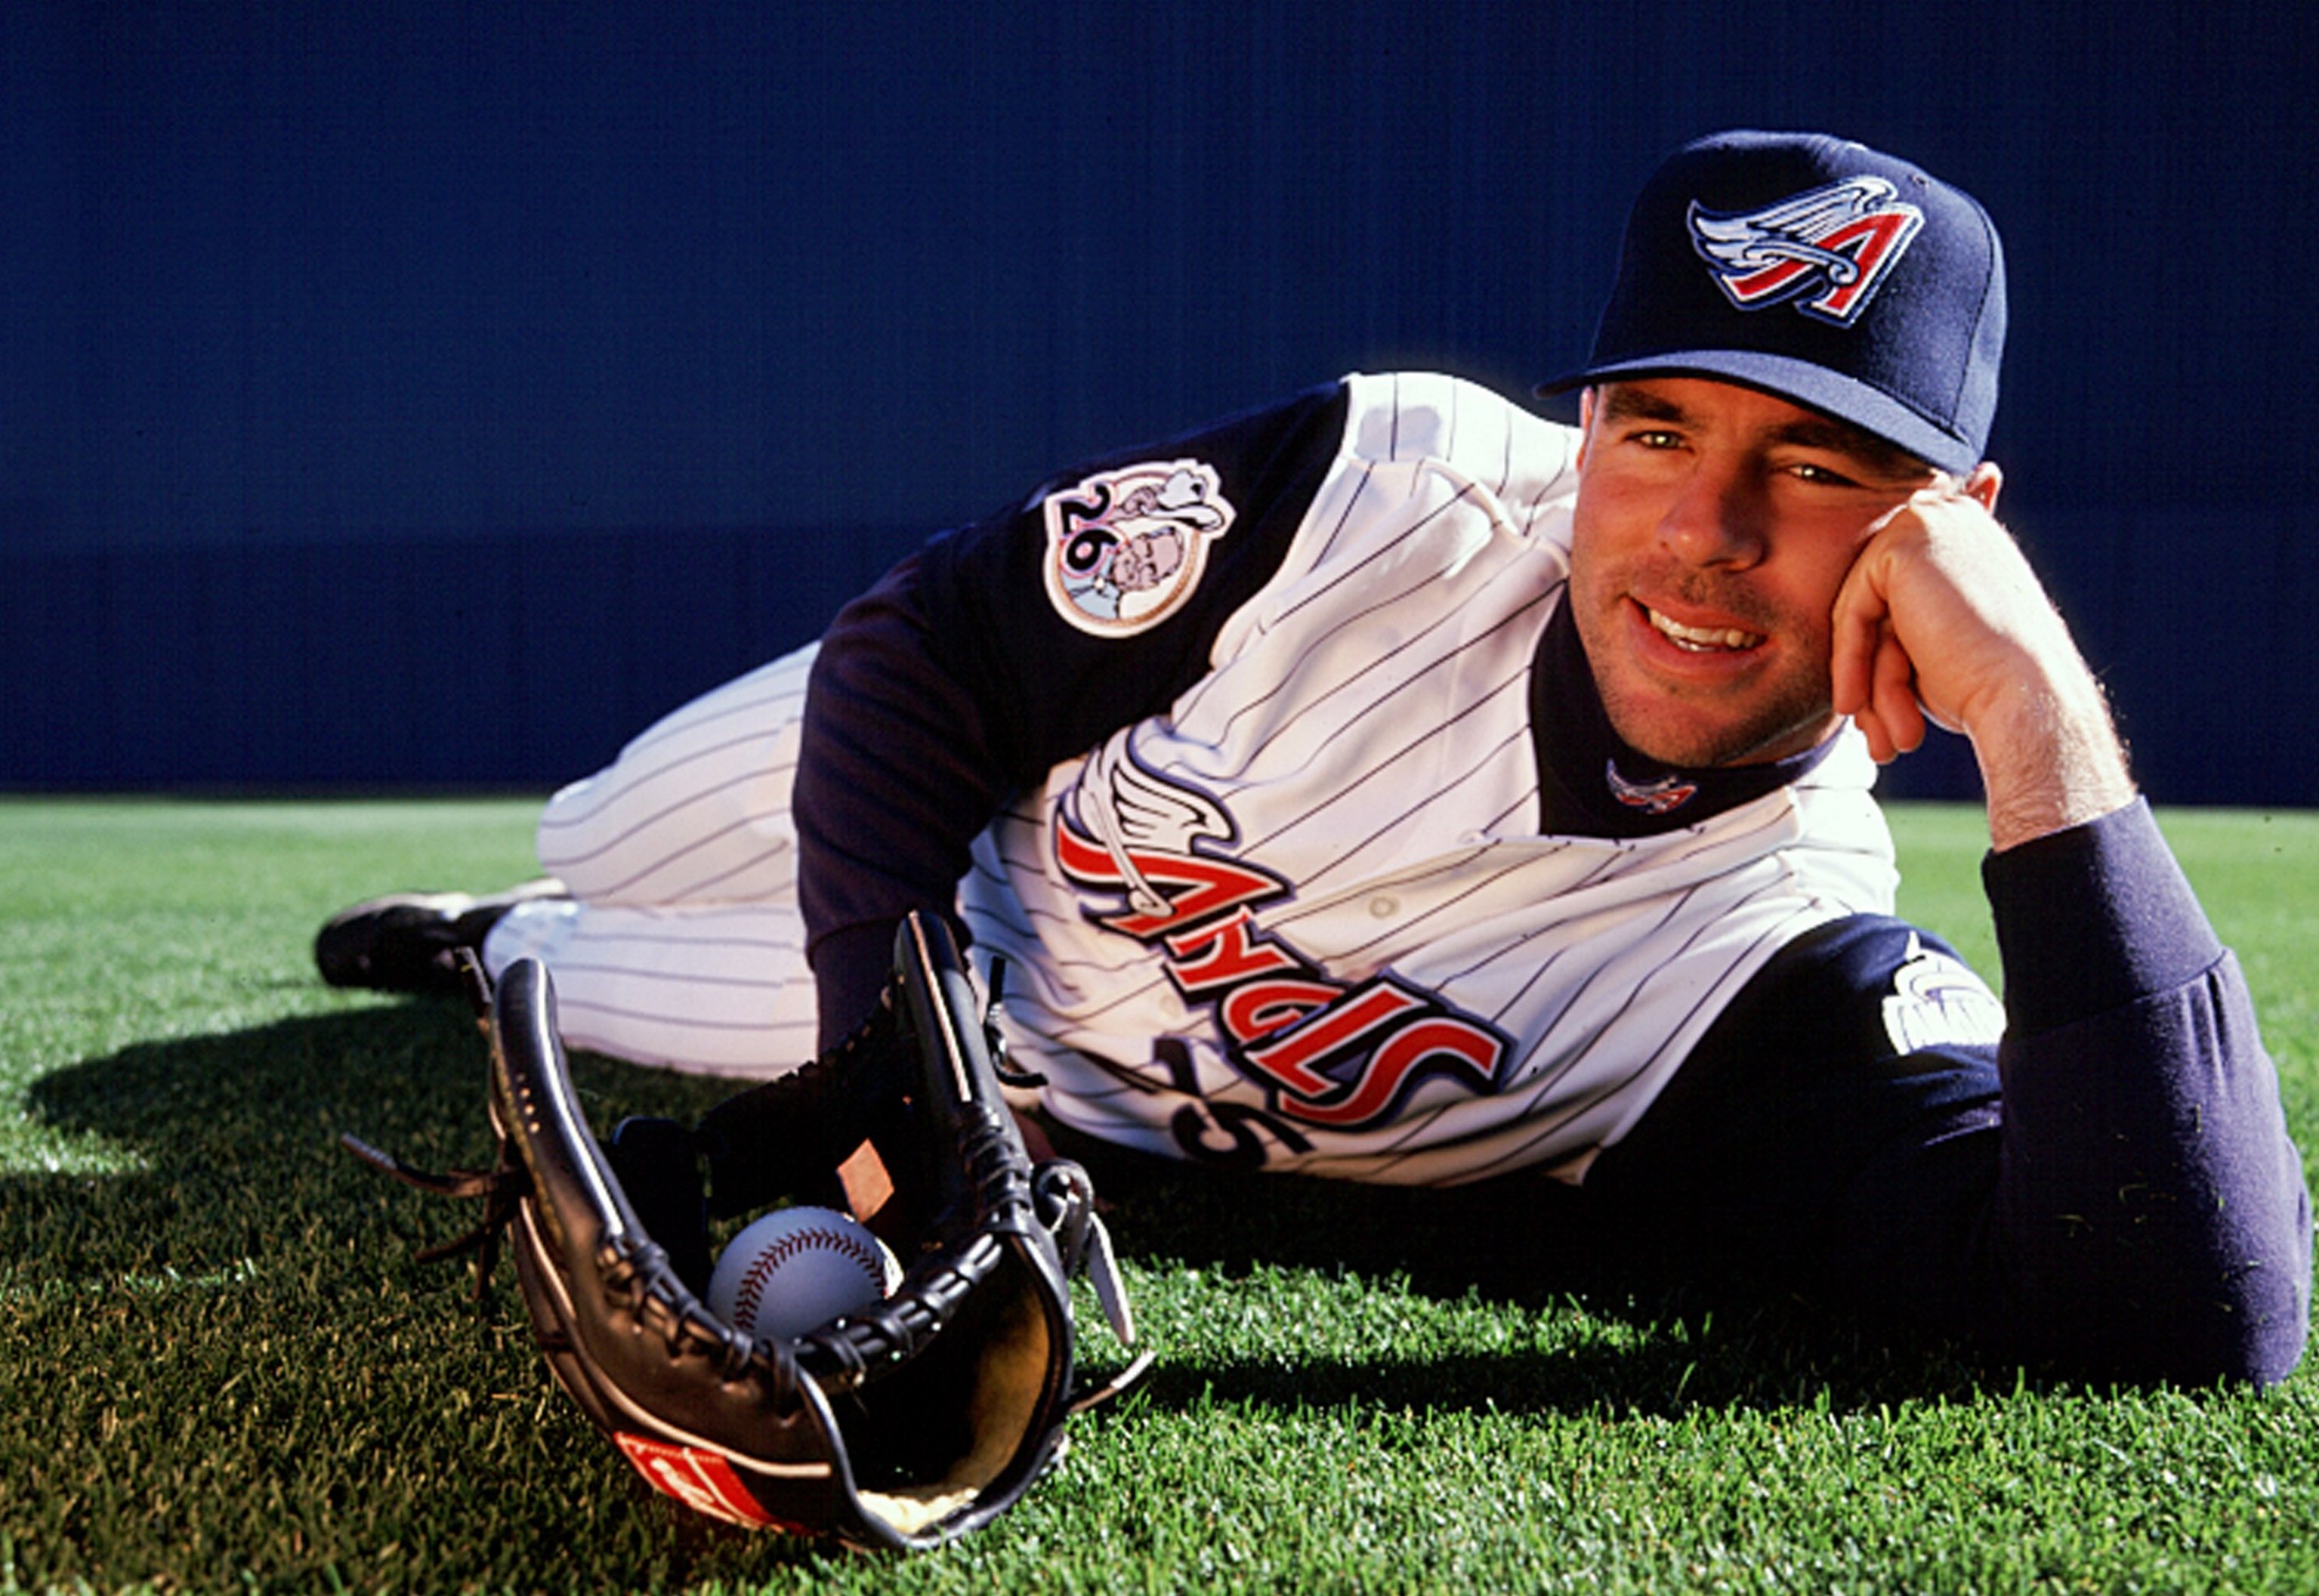 23 years ago today: Braves trade David Justice for Kenny Lofton